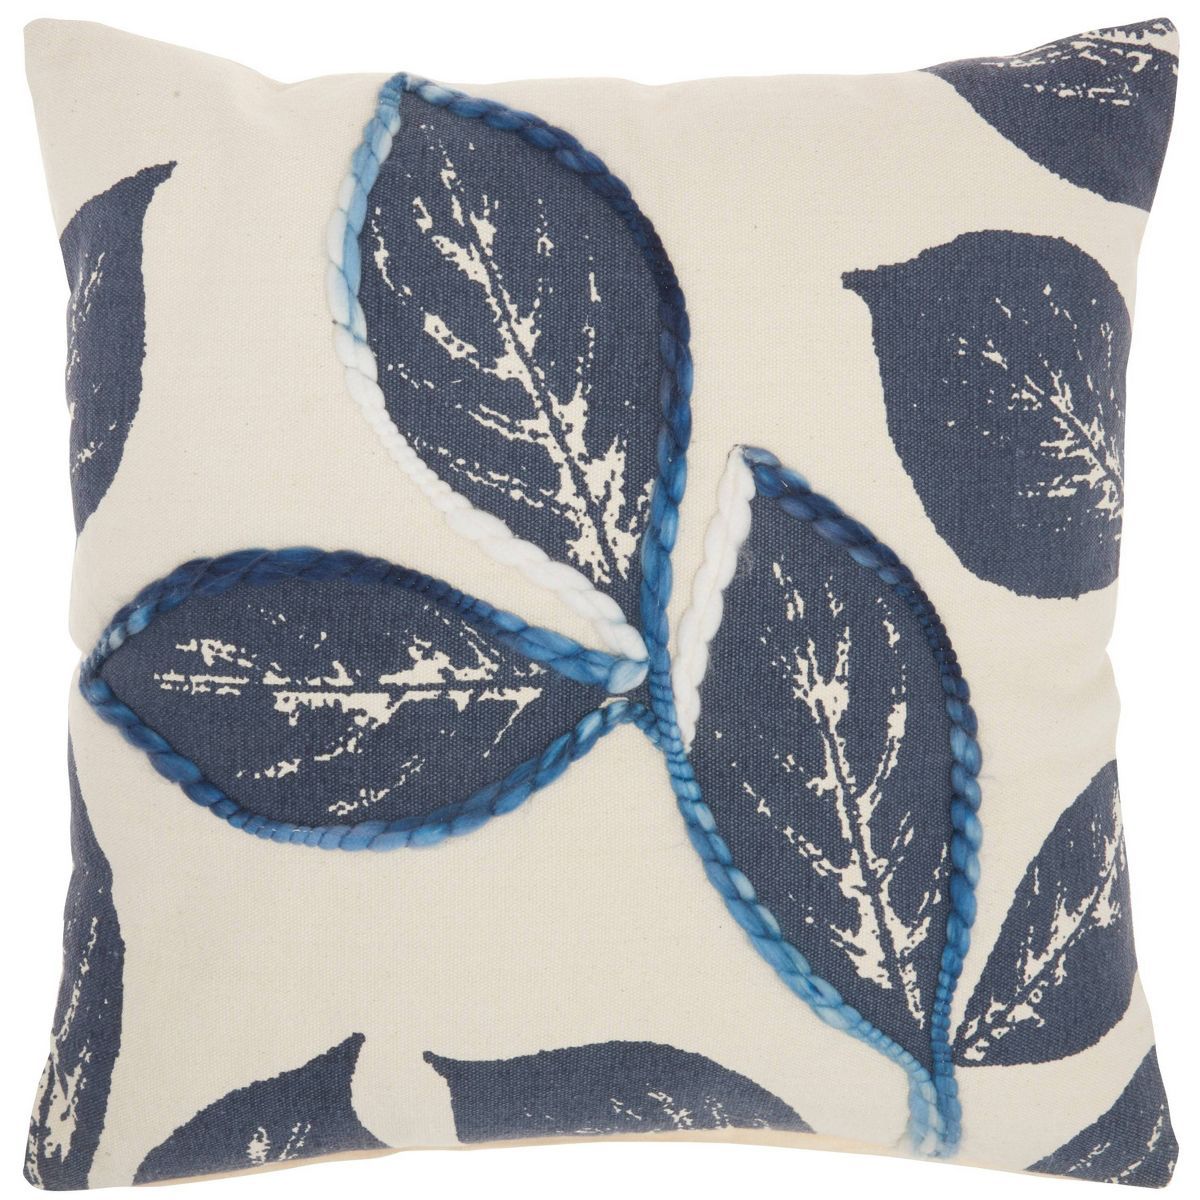 20"x20" Oversize Embroidered Leaves Square Throw Pillow - Mina Victory | Target